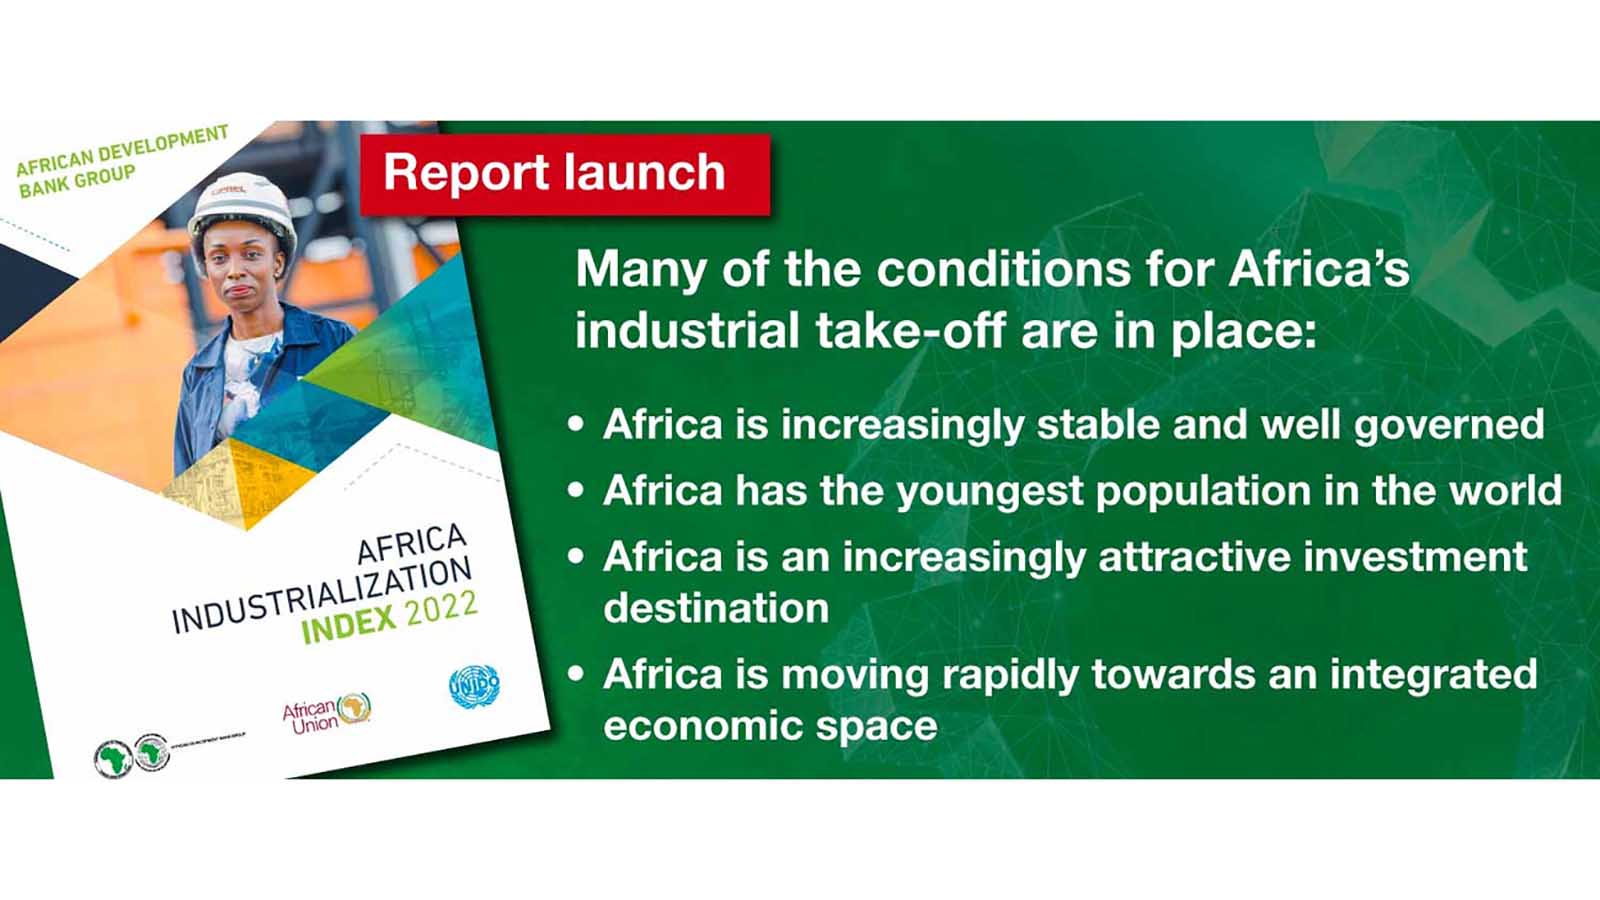 Africa makes progress in industrialization over the past decade, set for more growth